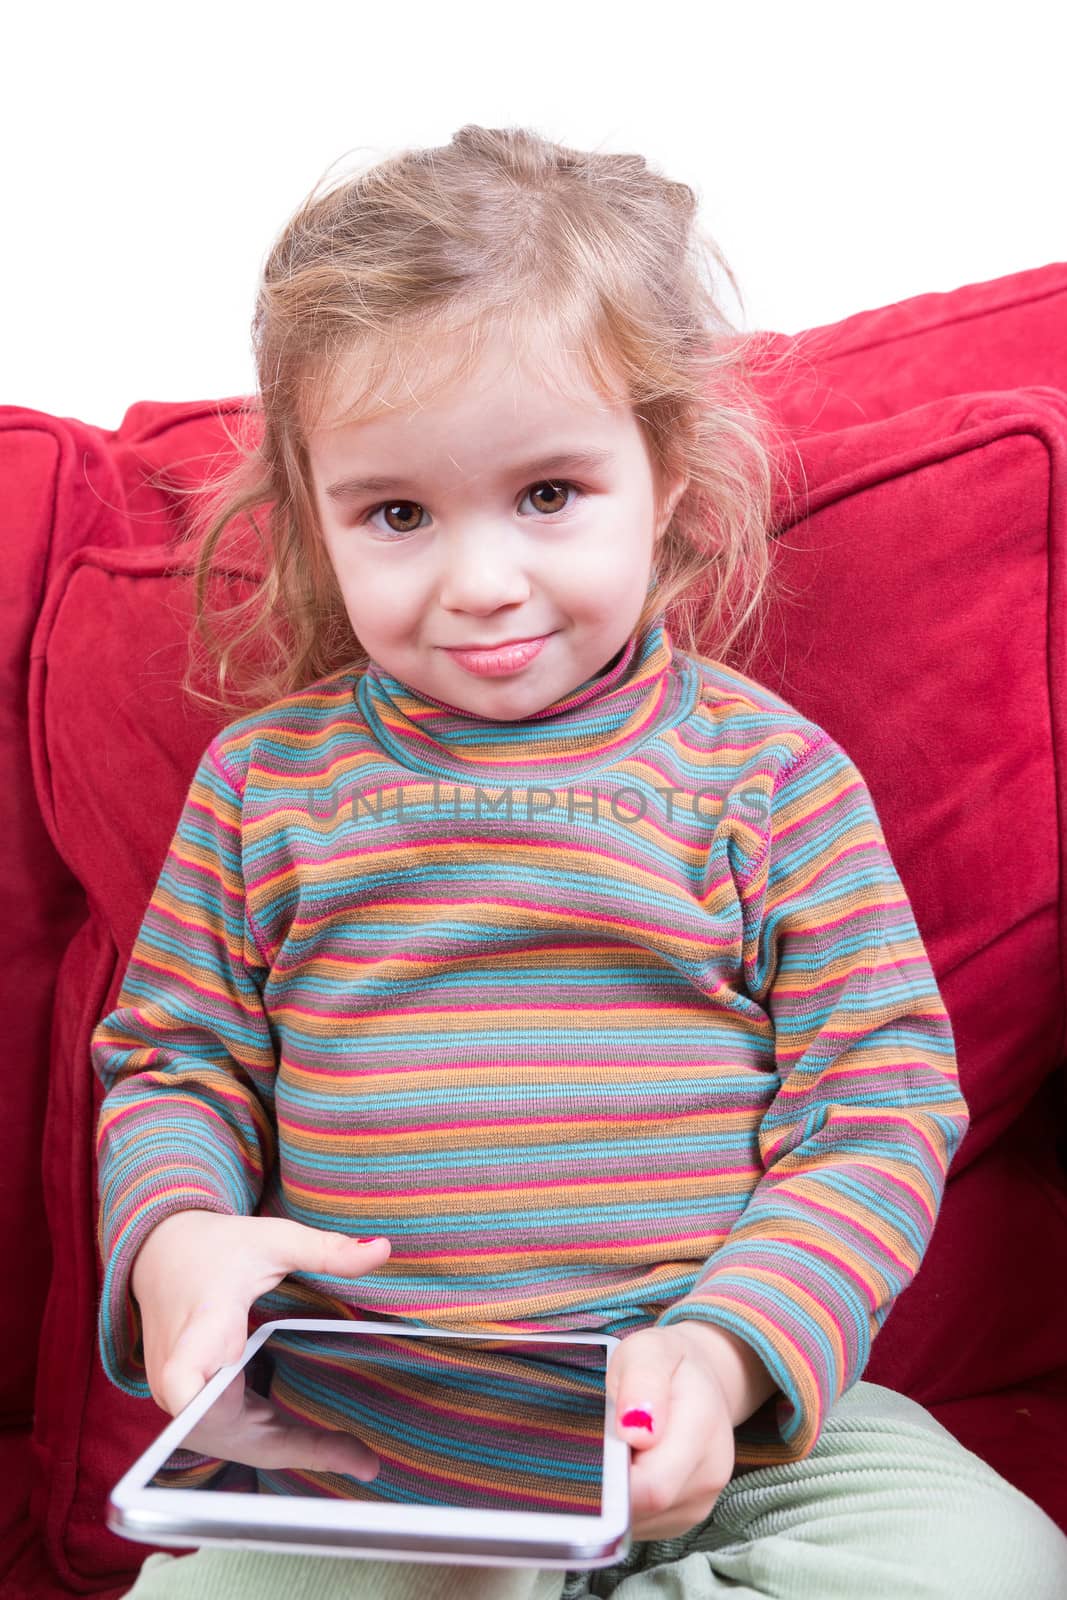 Cute pretty young girl with a tablet computer in her hands sitting on a red couch giving the camera a beautiful smile